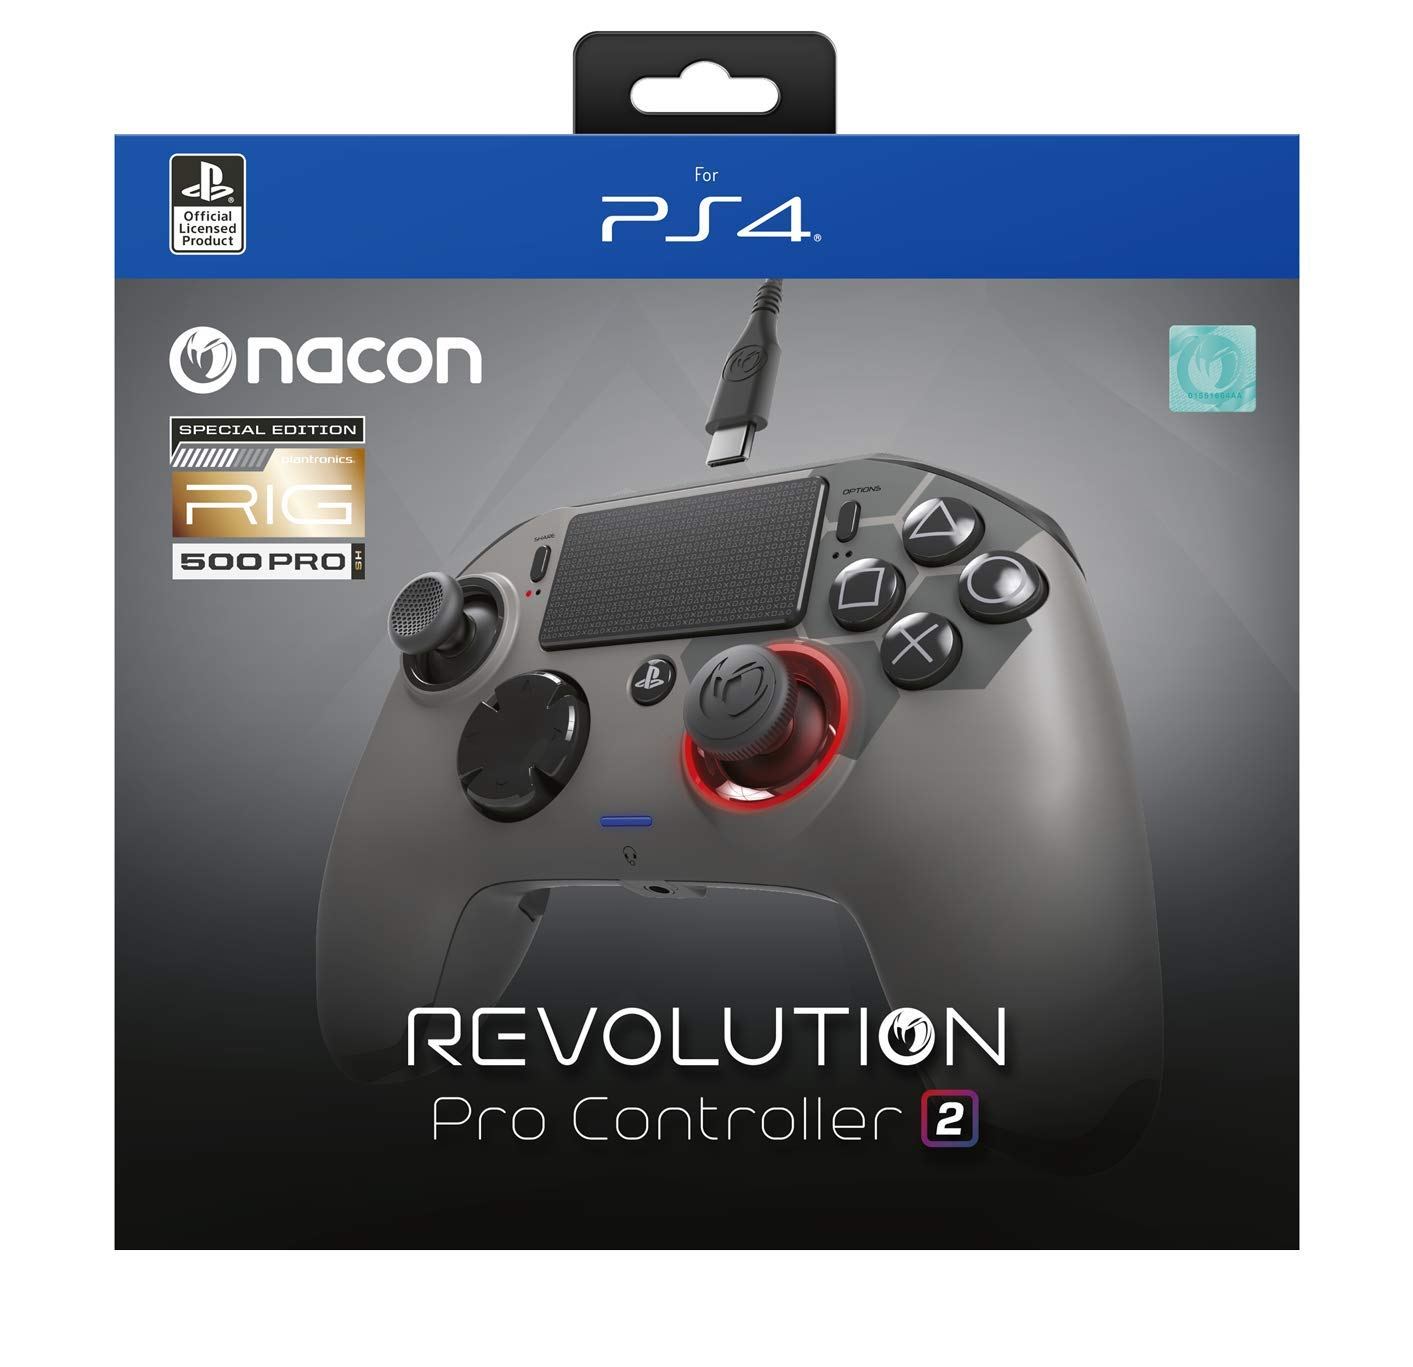 Buy Nacon Revolution Pro Controller 2 for PlayStation 4 (Rig Limited  Edition) for Windows, PlayStation 4, Playstation 4 Pro